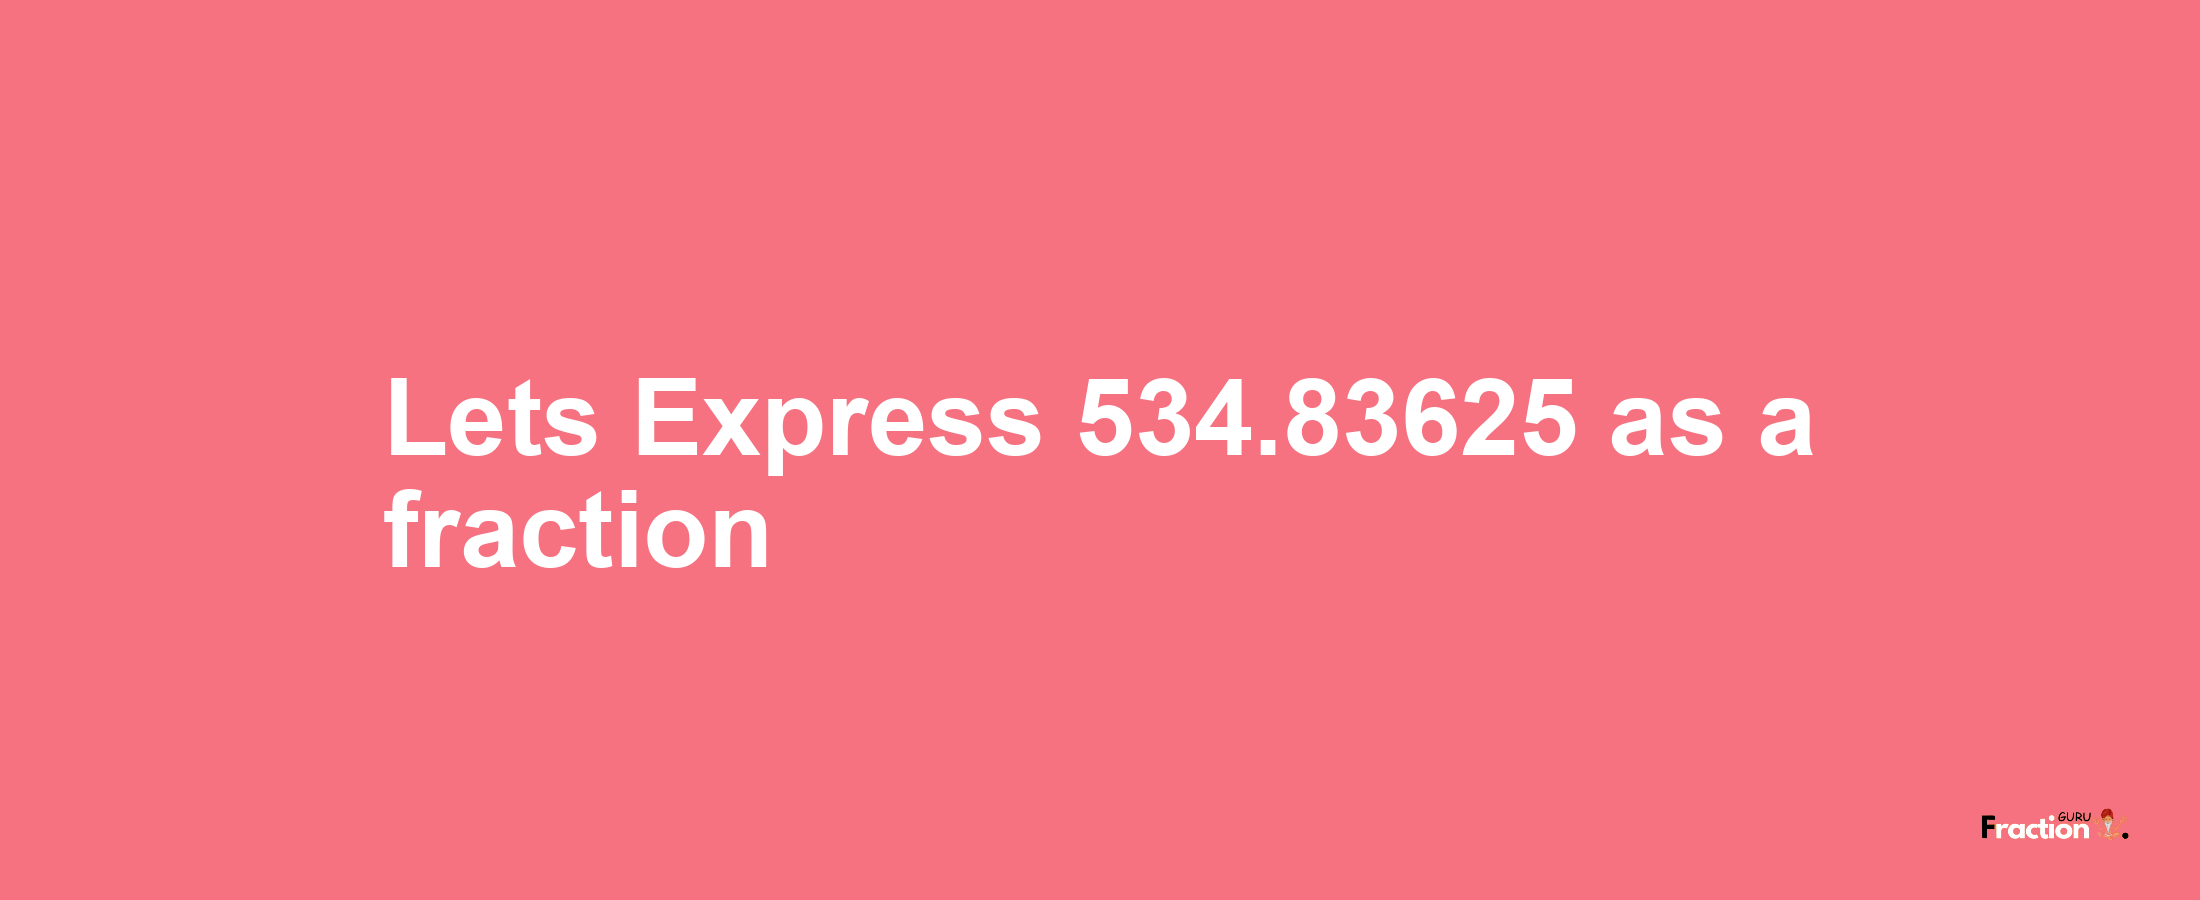 Lets Express 534.83625 as afraction